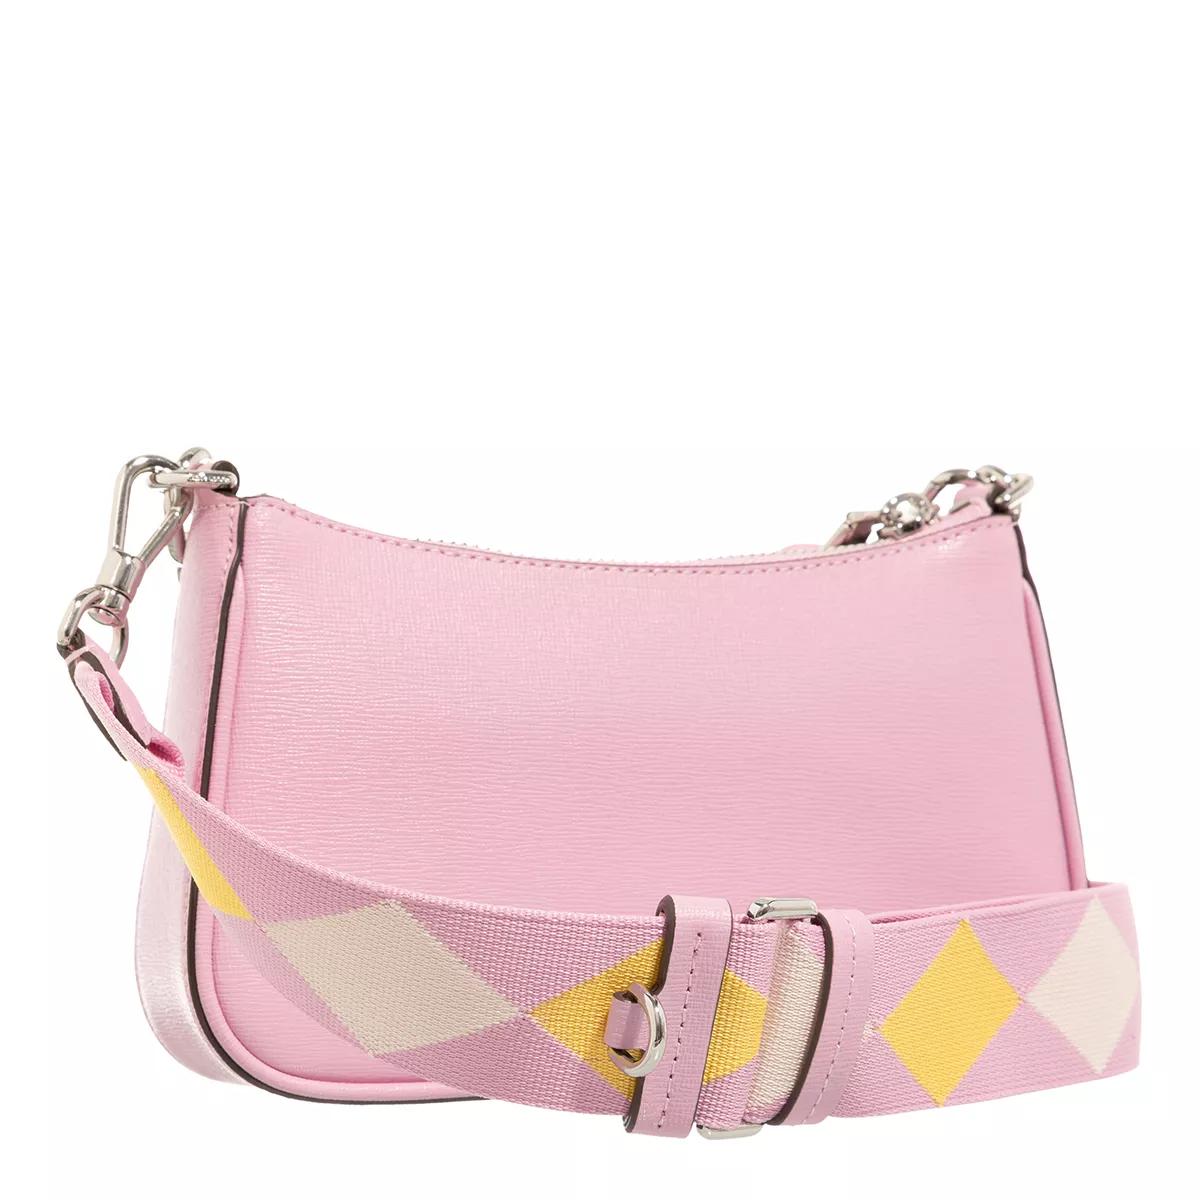 Kate spade new york Crossbody bags Double Up Colorblocked Saffiano Leather in poeder roze